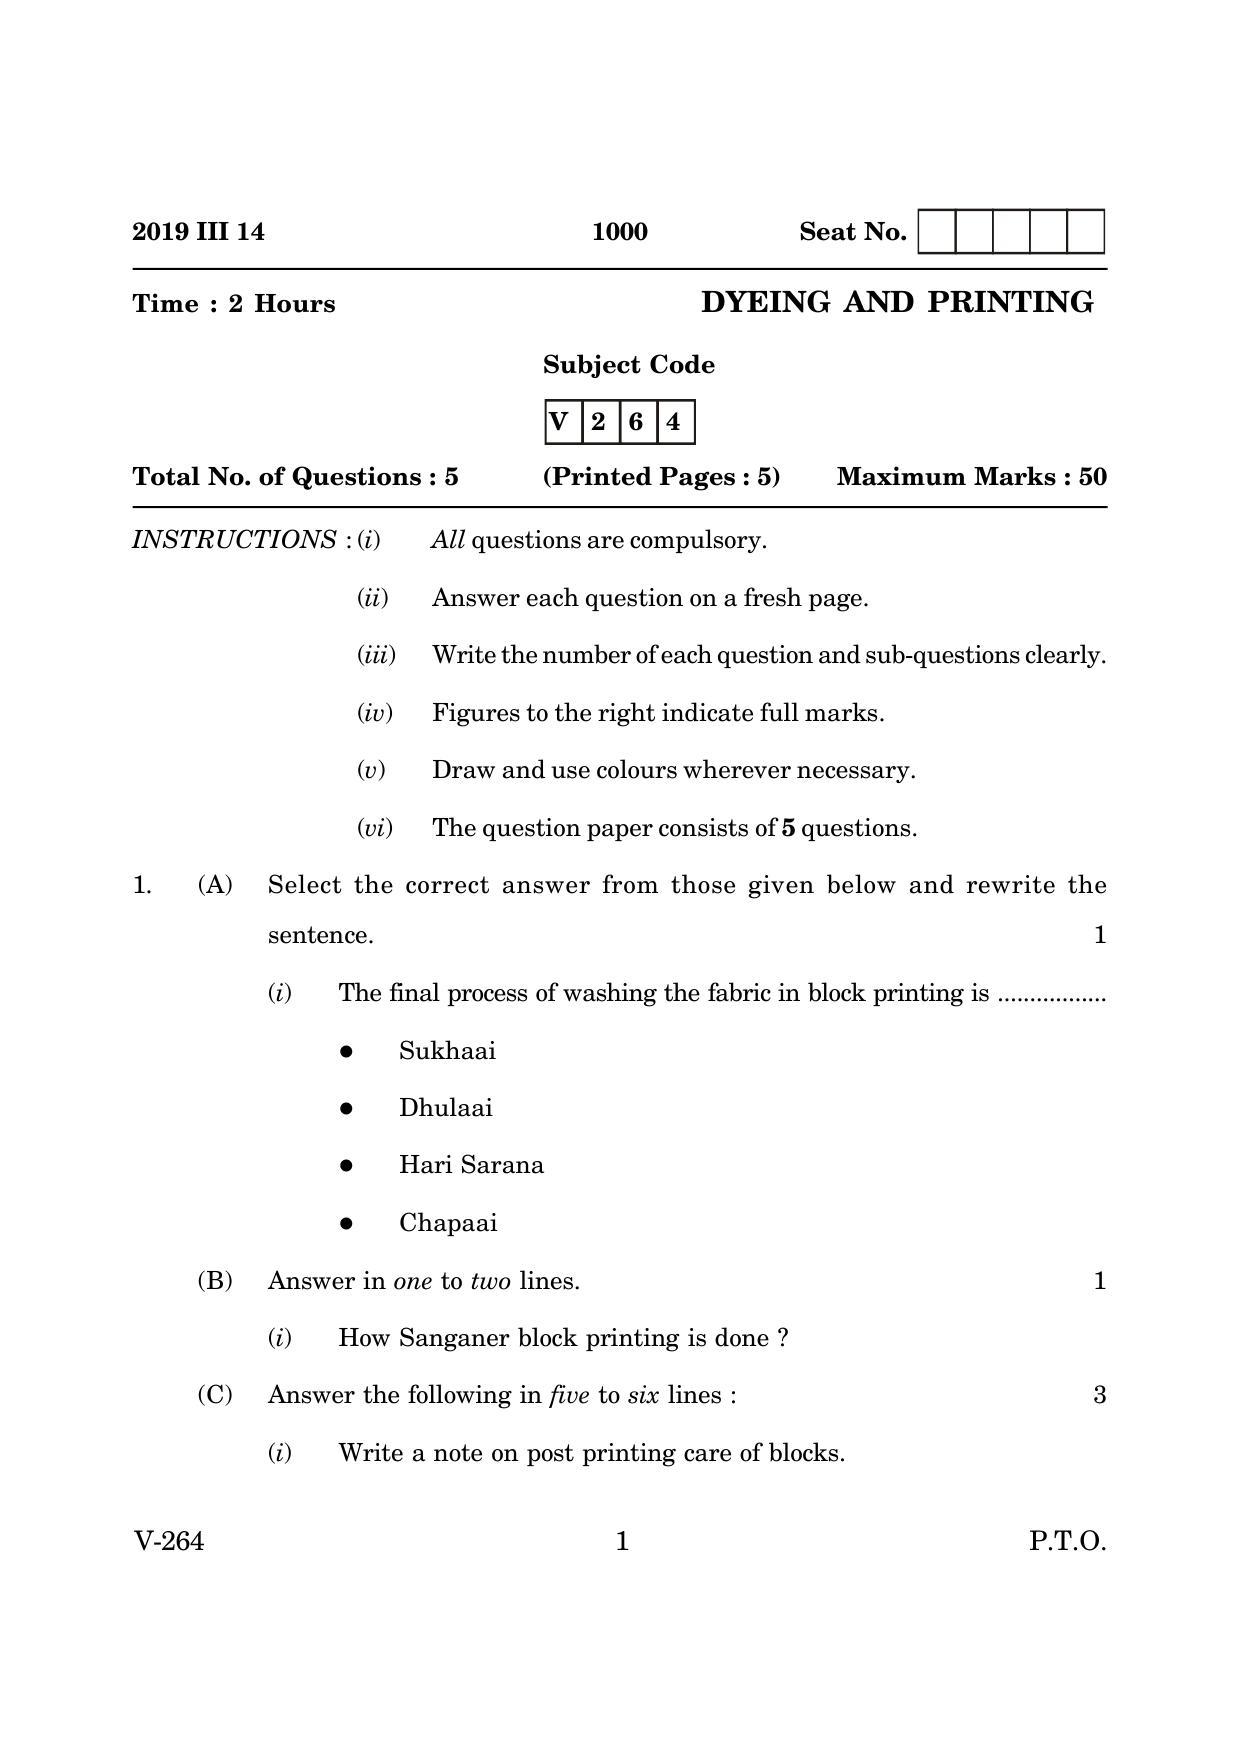 Goa Board Class 12 Dyeing and printing   (March 2019) Question Paper - Page 1